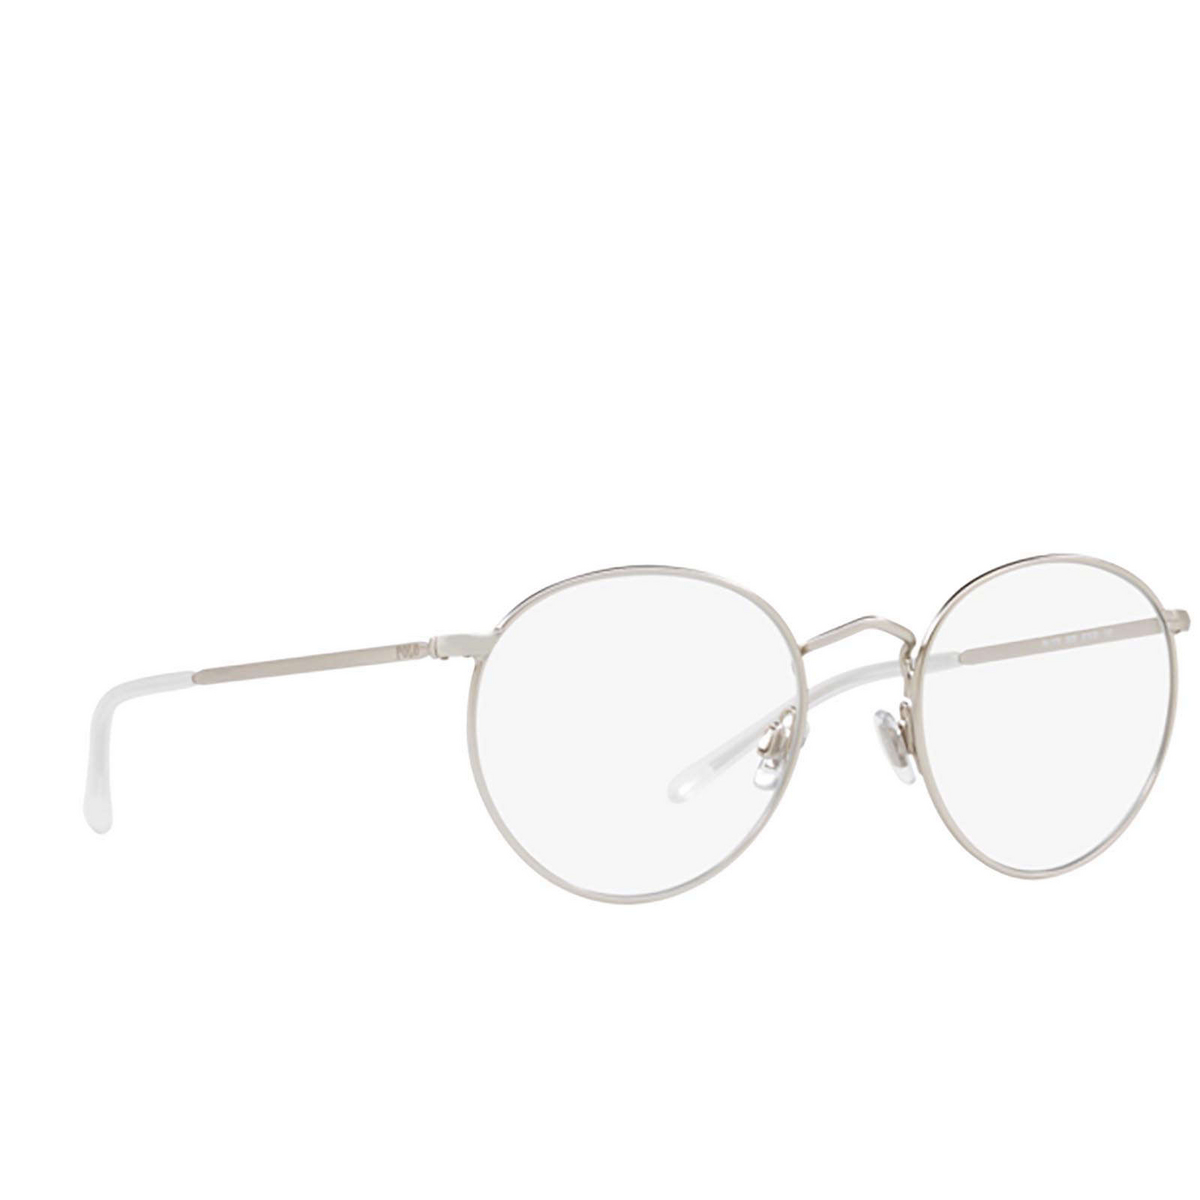 Polo Ralph Lauren® Round Eyeglasses: PH1179 color Semi-shiny Brushed Silver 9326 - three-quarters view.